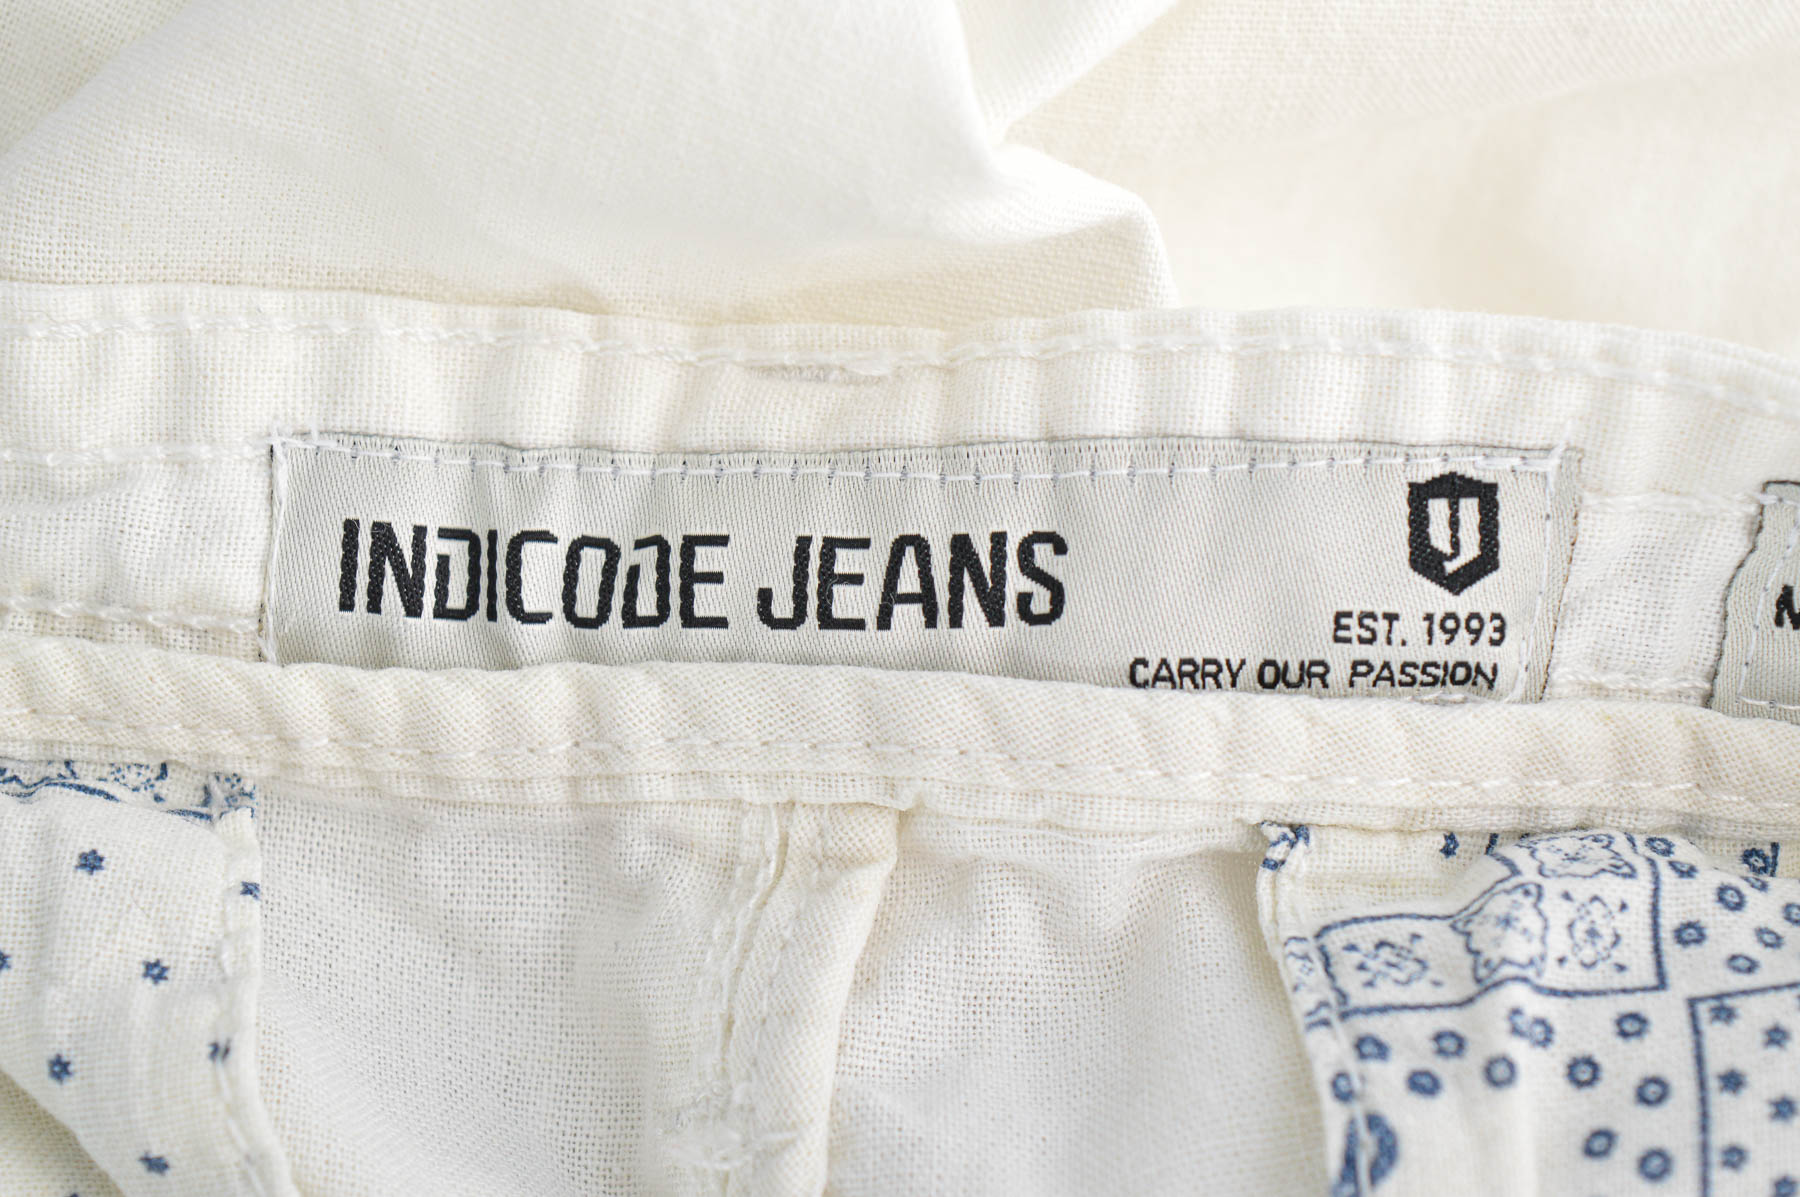 Men's trousers - INDICODE JEANS - 2